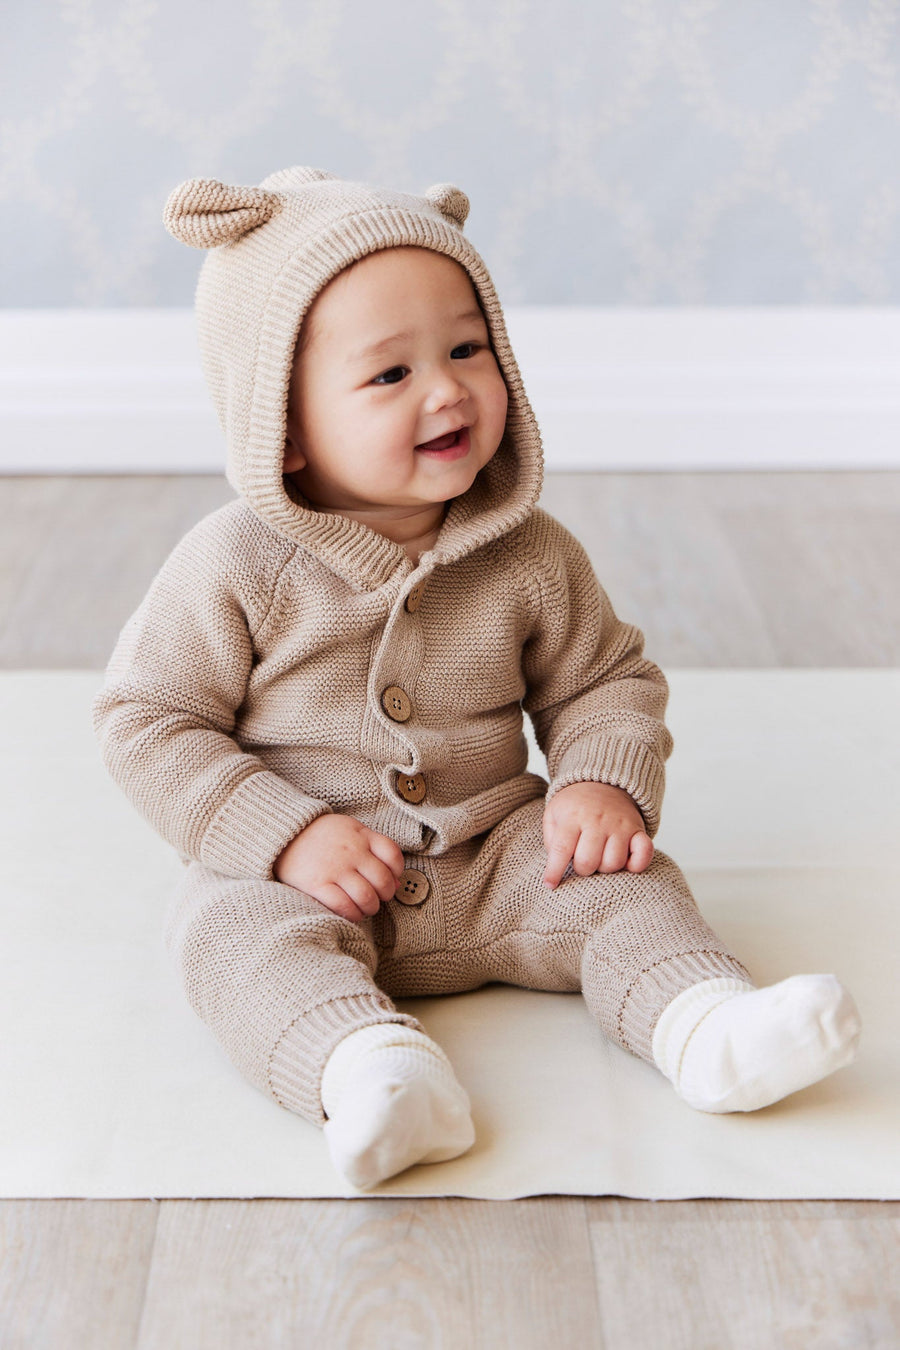 Jack Playsuit - Cashew Marle Childrens Playsuit from Jamie Kay USA